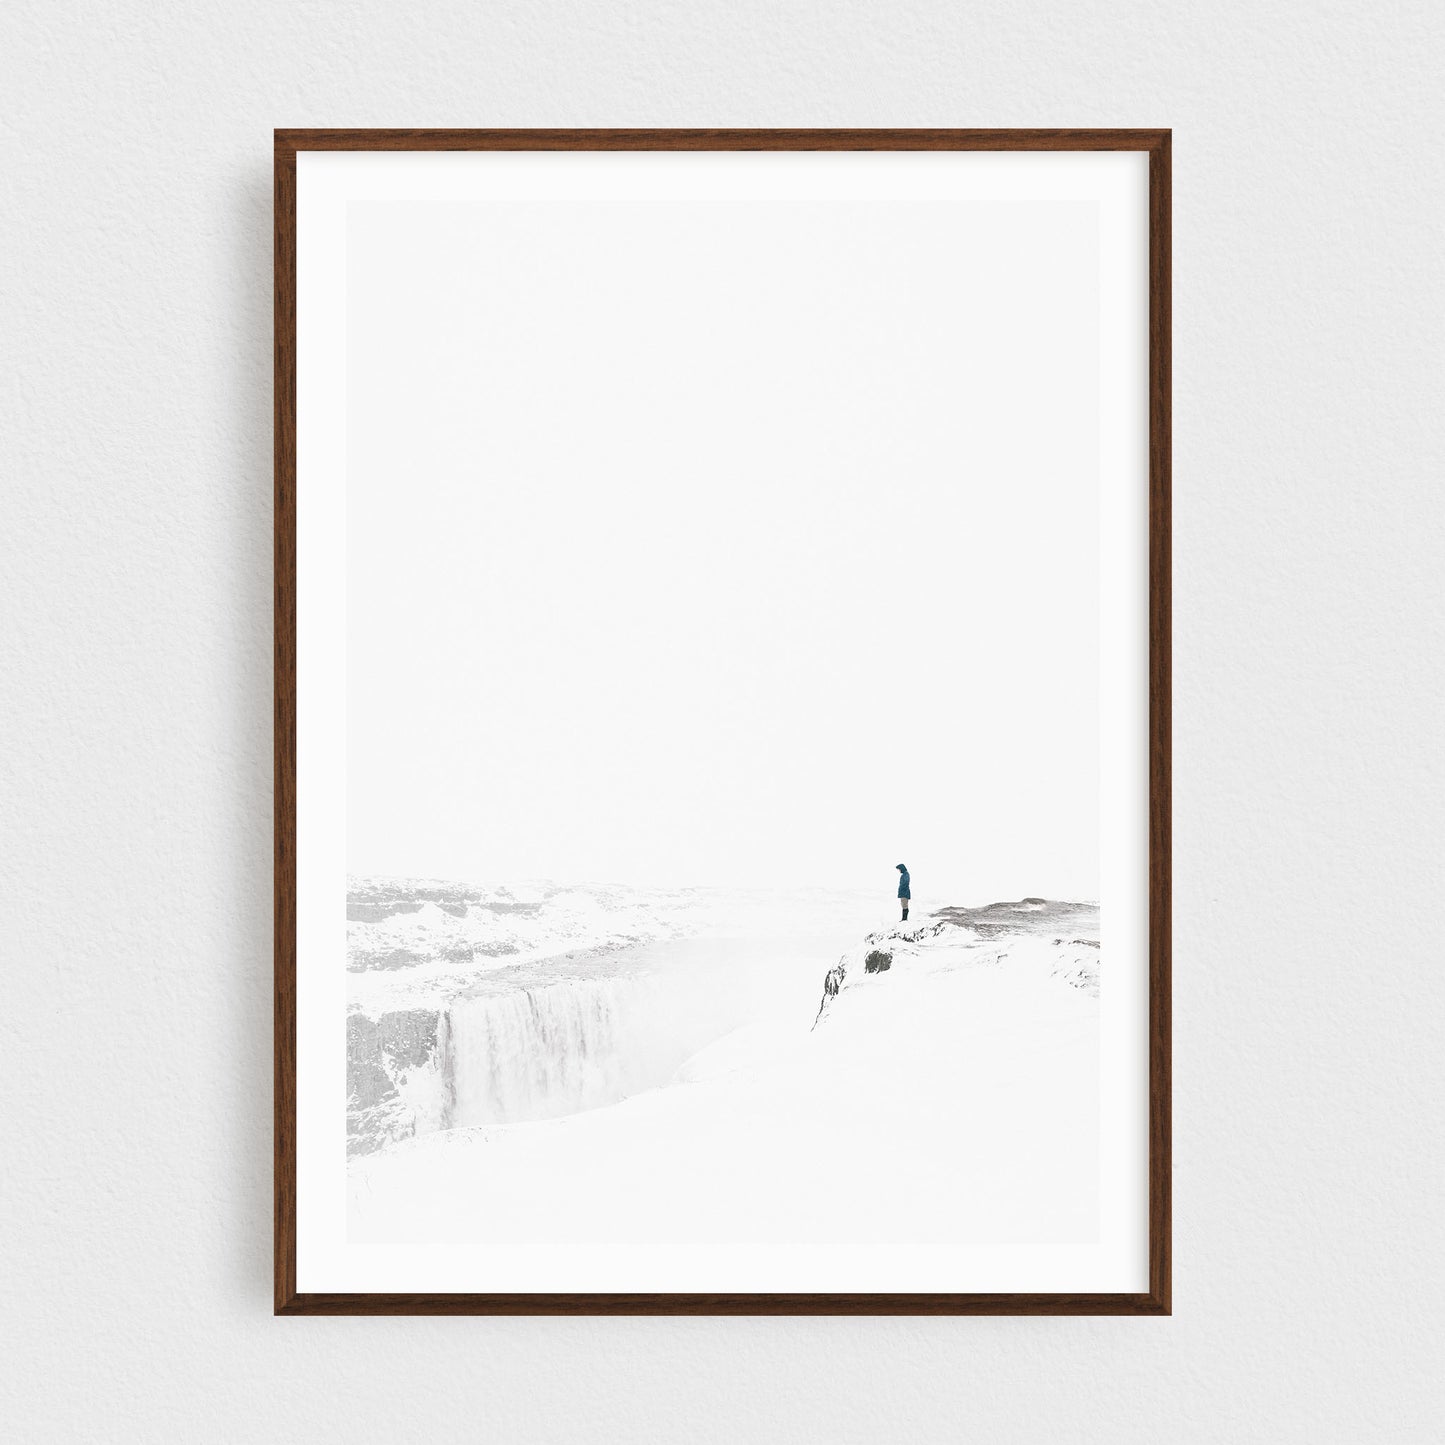 Iceland fine art photography print featuring Dettifoss waterfall in winter, in a walnut frame